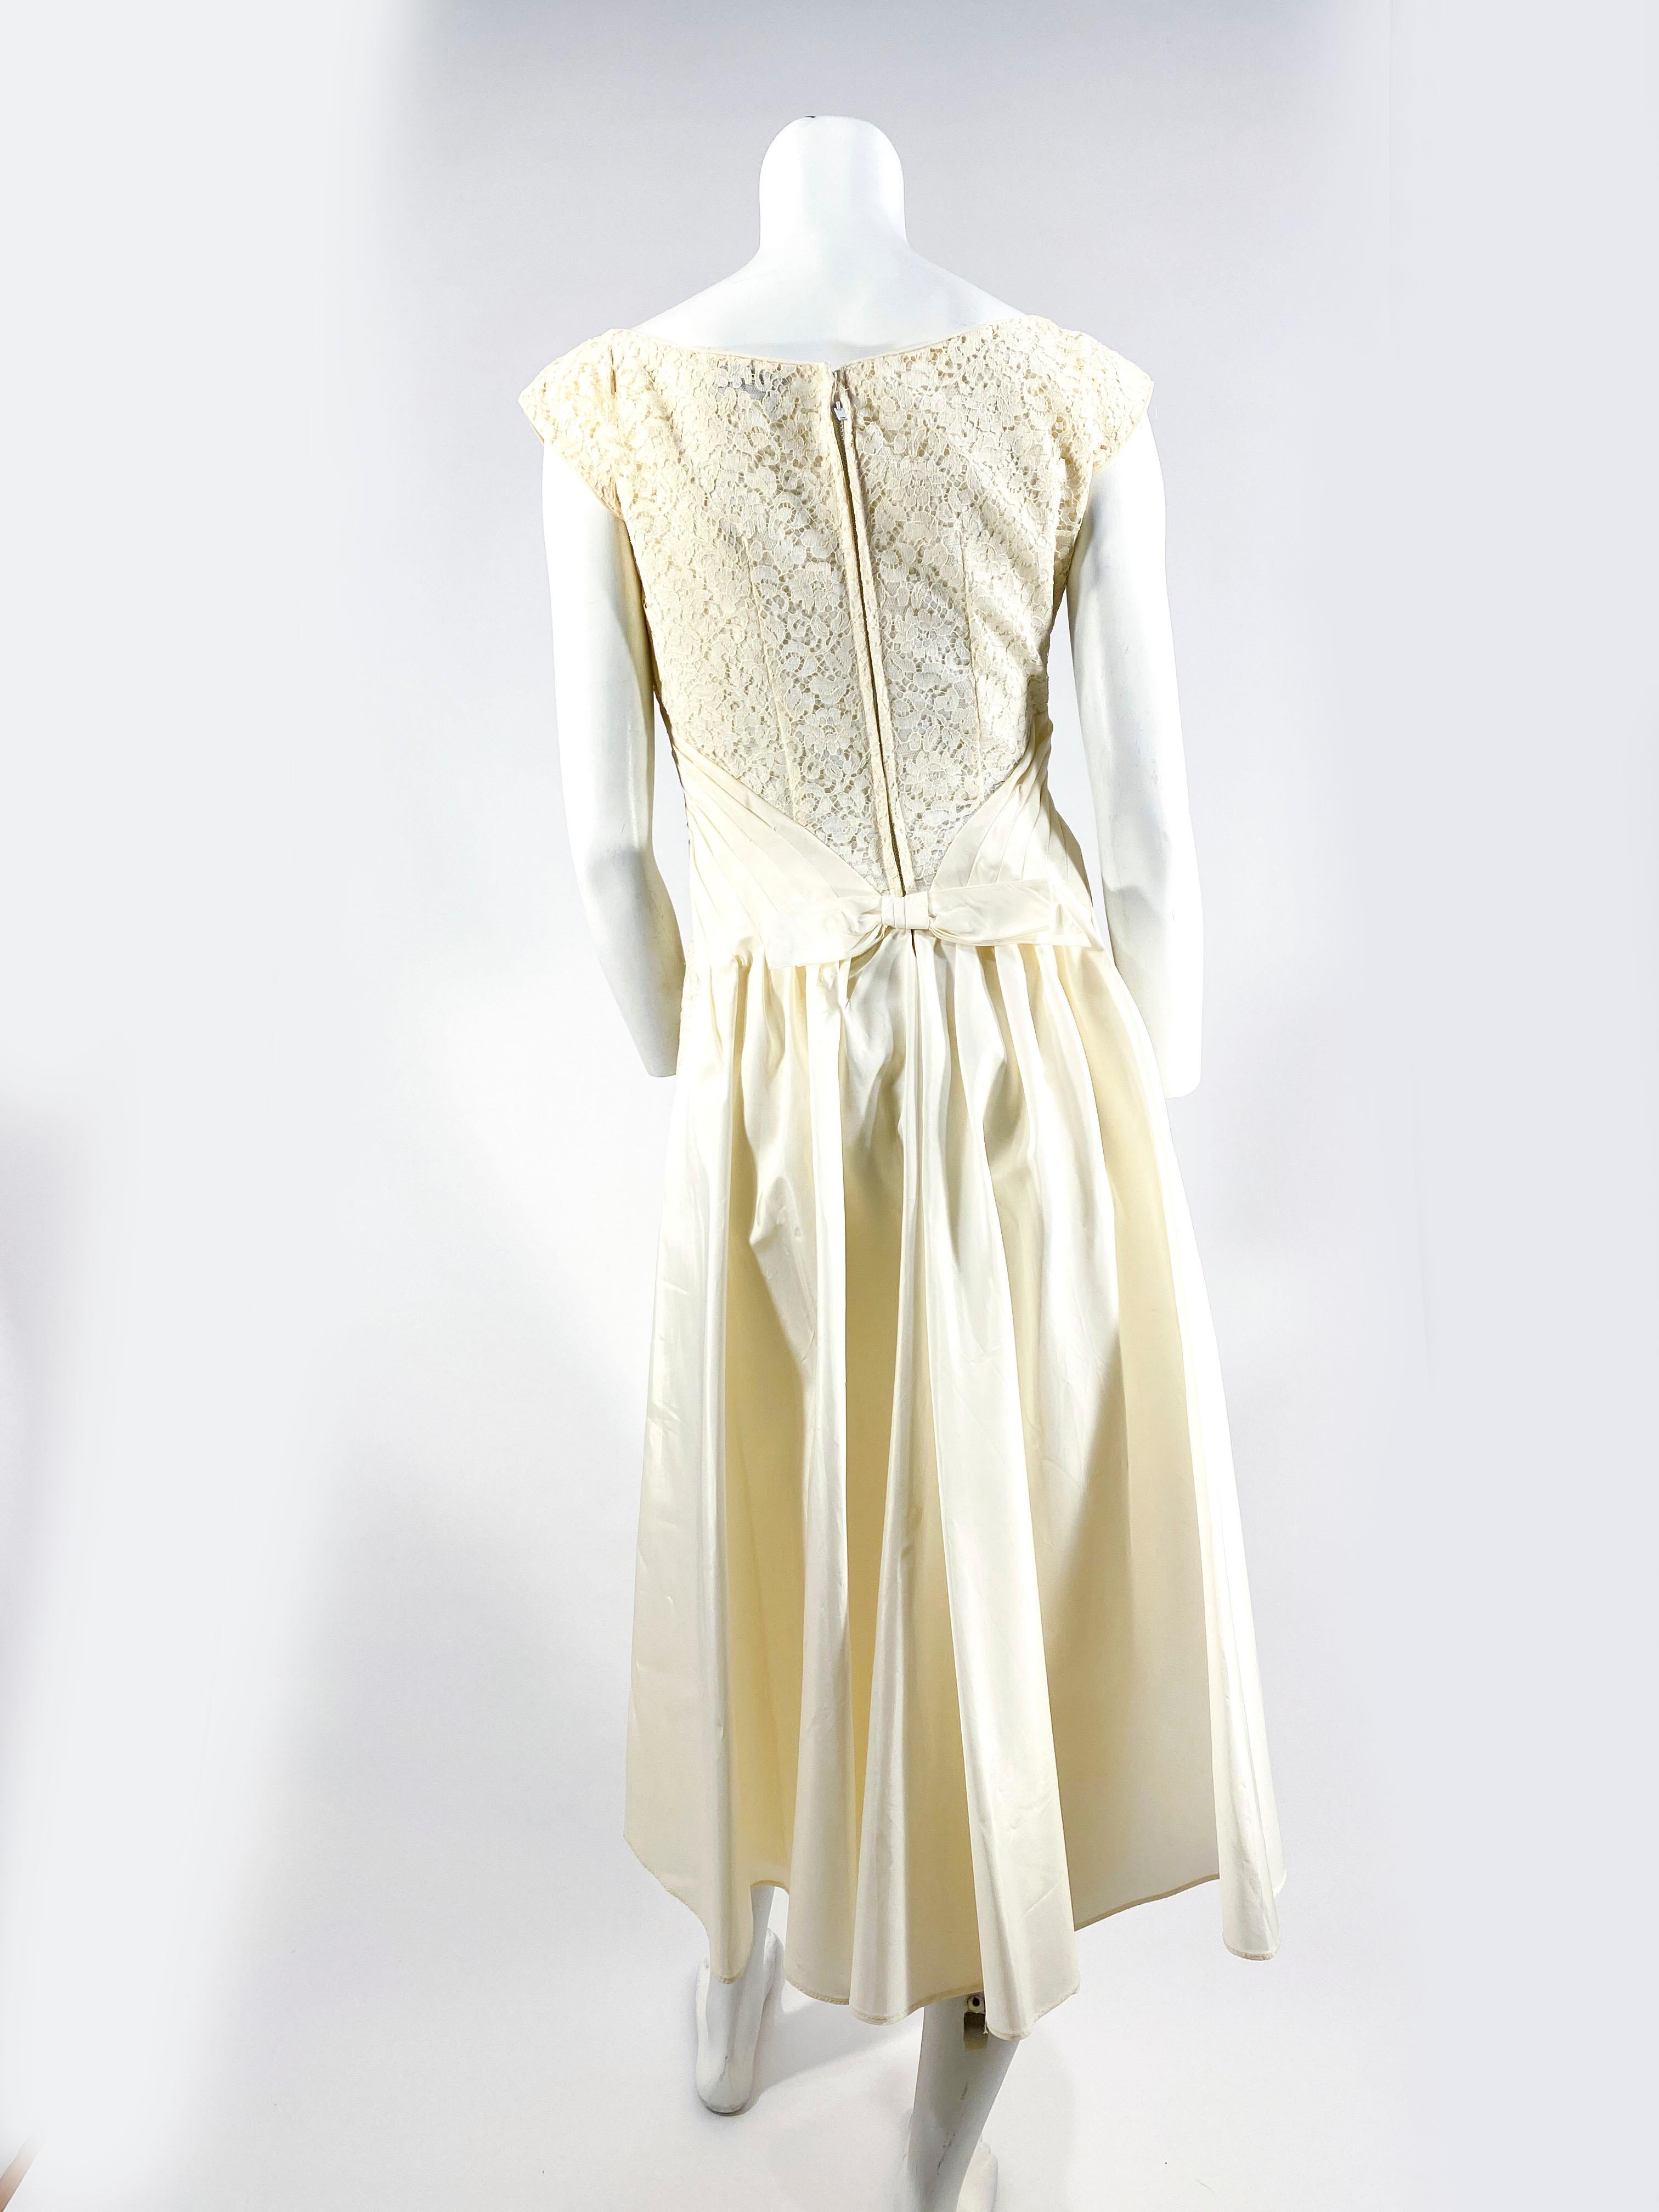 1950s Emma Domb Off-white Lace Dress with Taffeta Waist and Draped back In Good Condition For Sale In San Francisco, CA